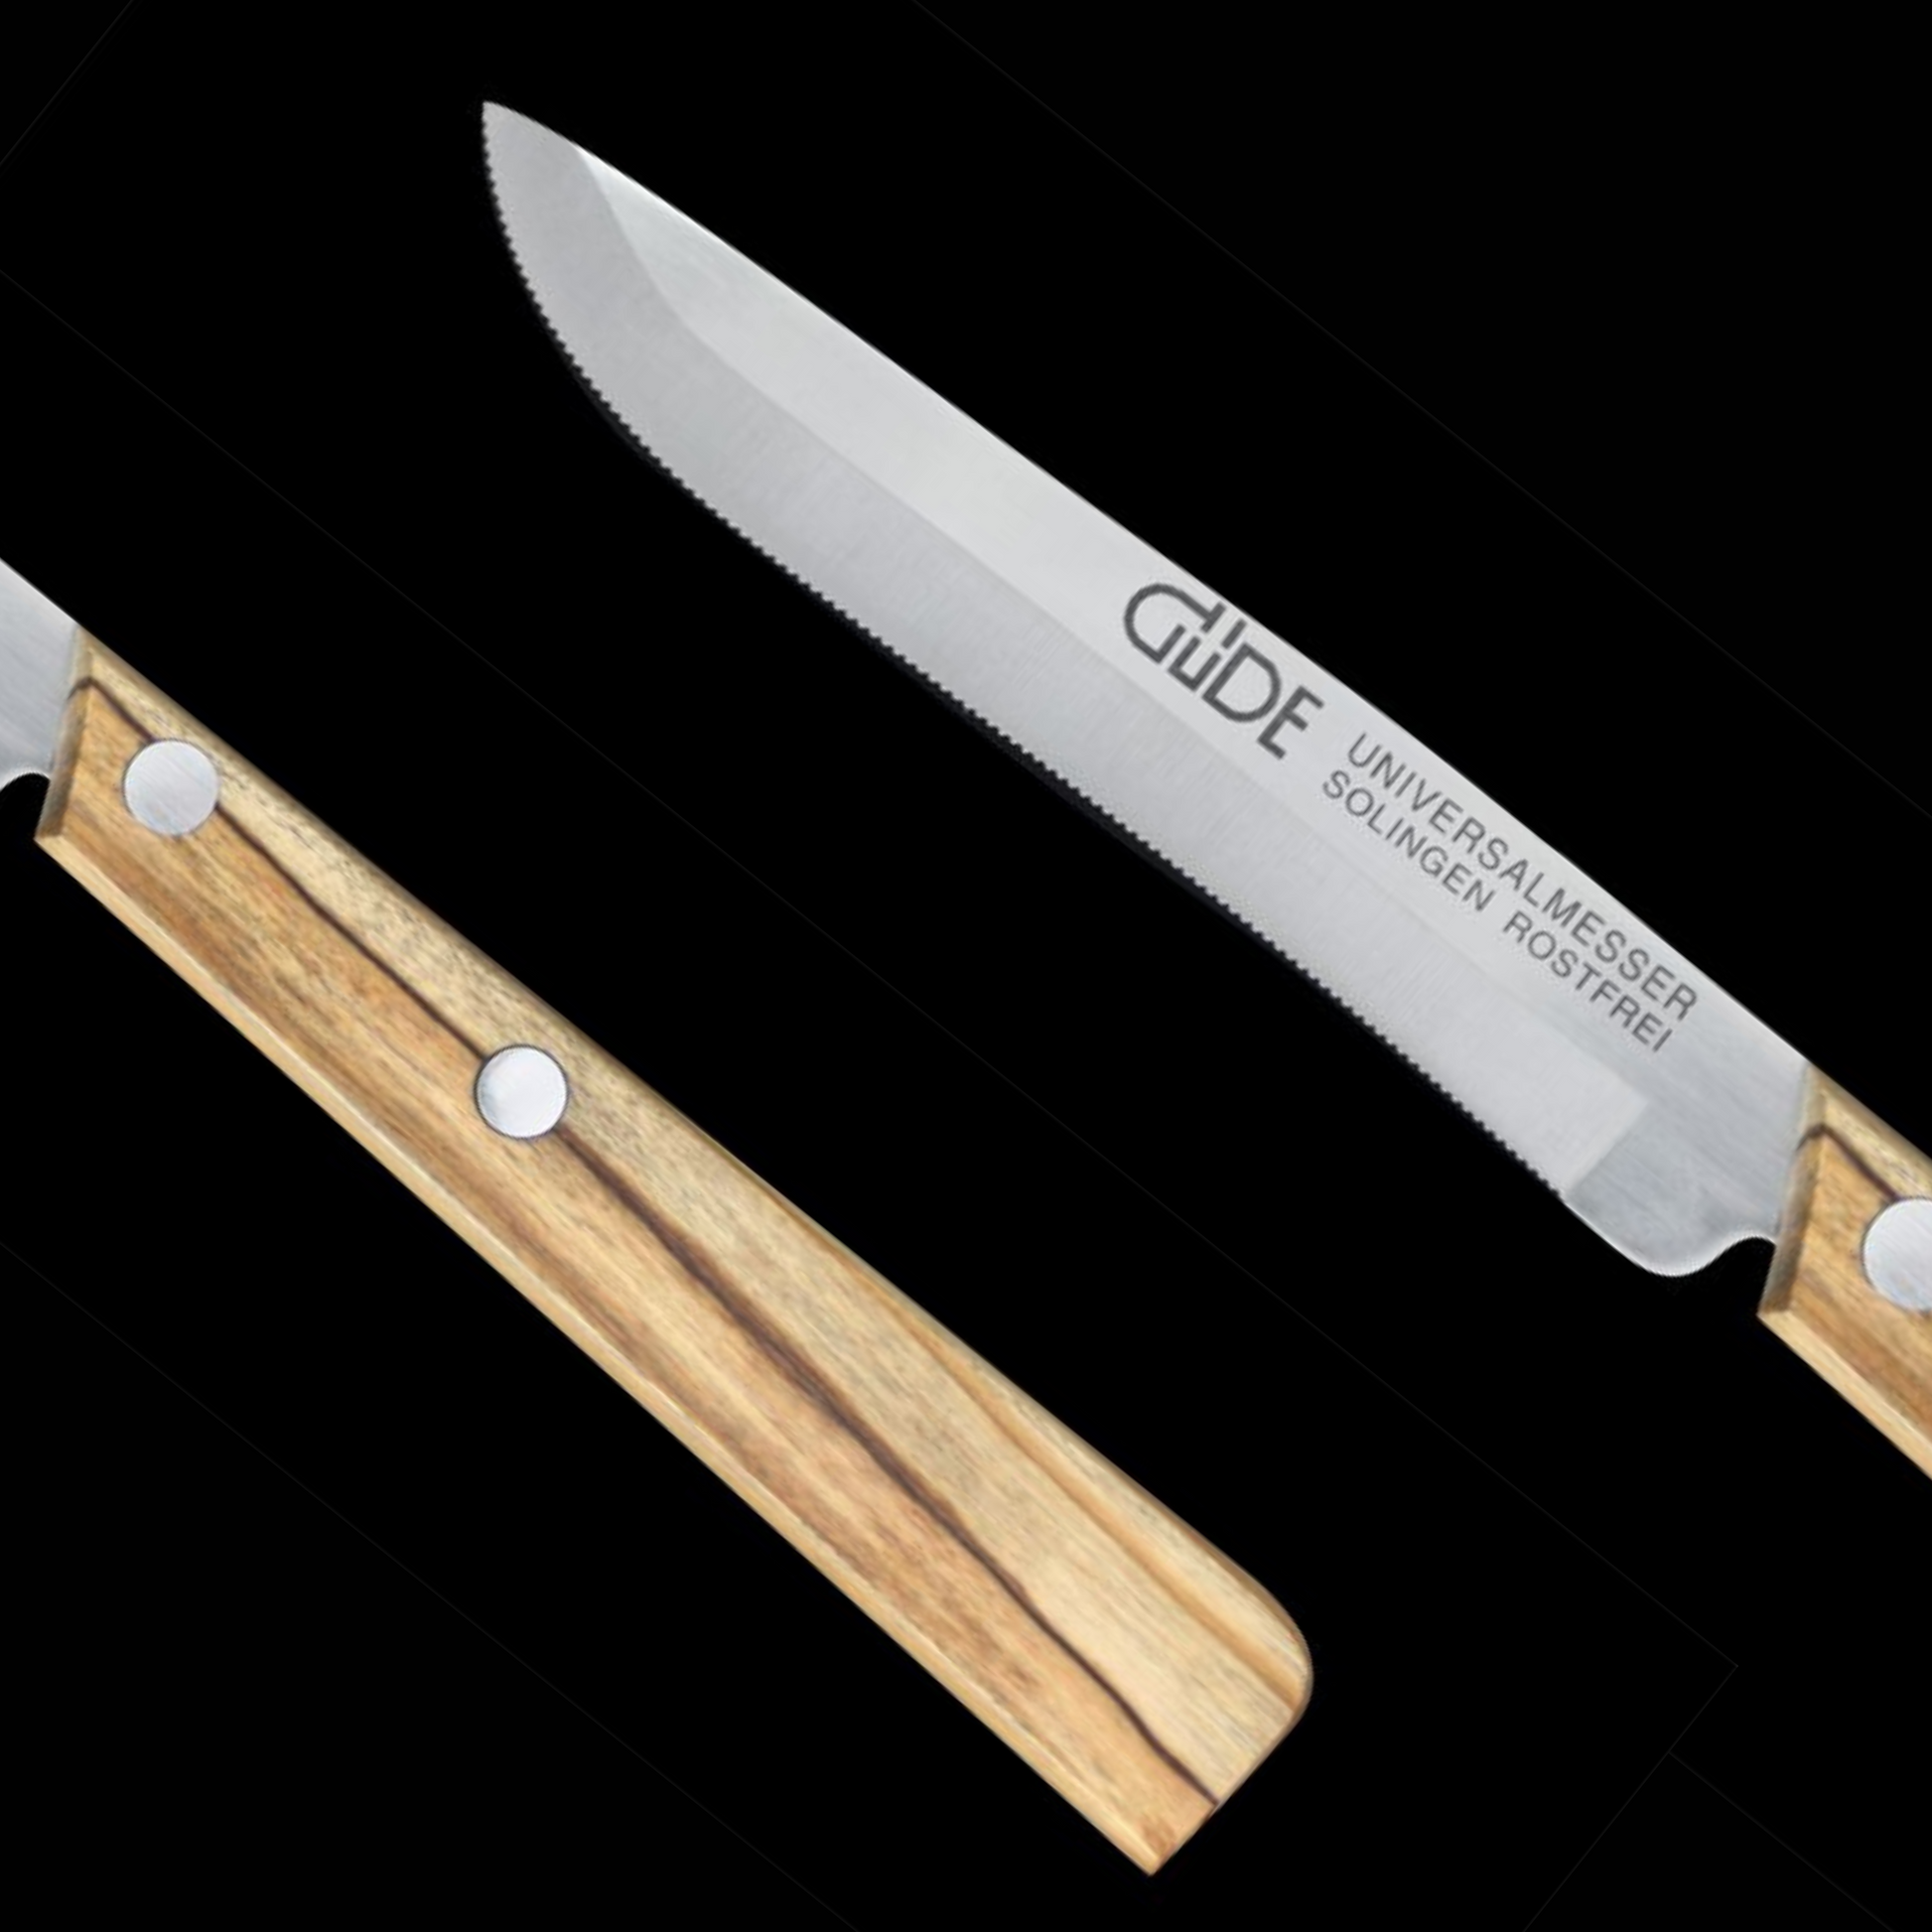 Gude Universal Knife Series 3", Olive Wood Handle and Serrated Blade - GuedeUSA